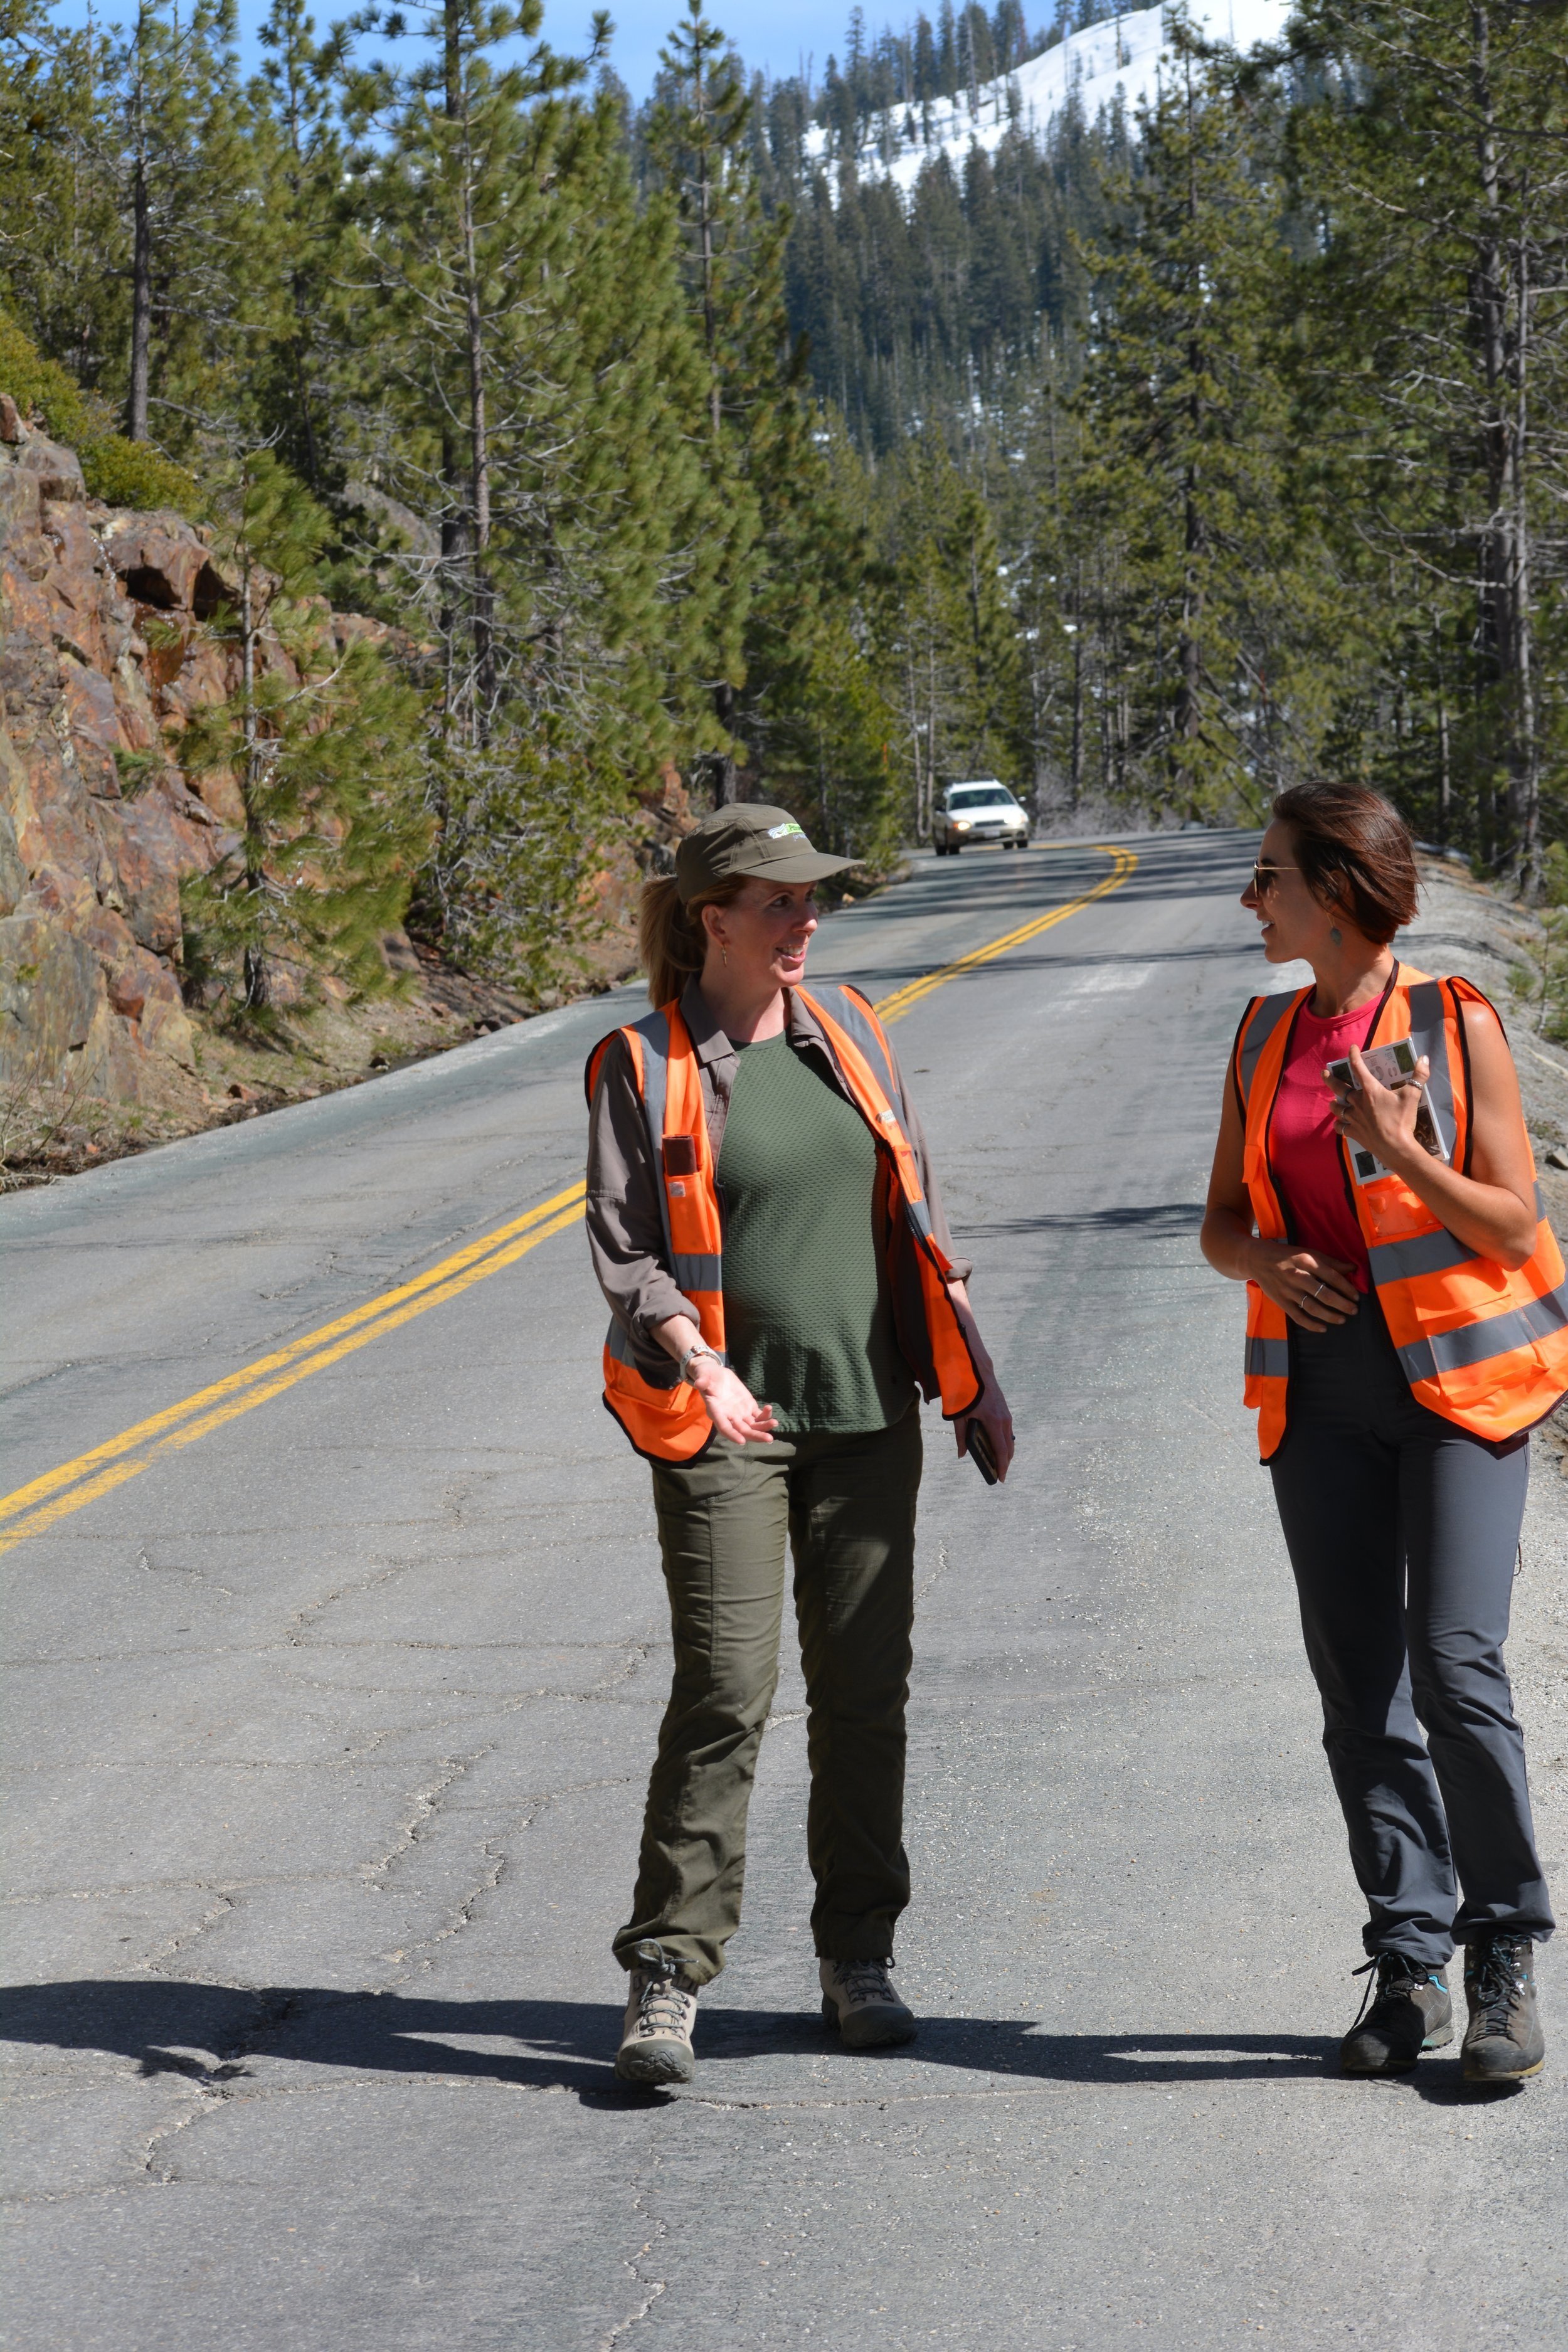  I had the chance to scheme conservation opportunities with Pathways for Wildlife’s Wildlife Ecologist Tanya Diamond while we assessed bridges, culverts, and existing wildlife underpasses on I-80. 